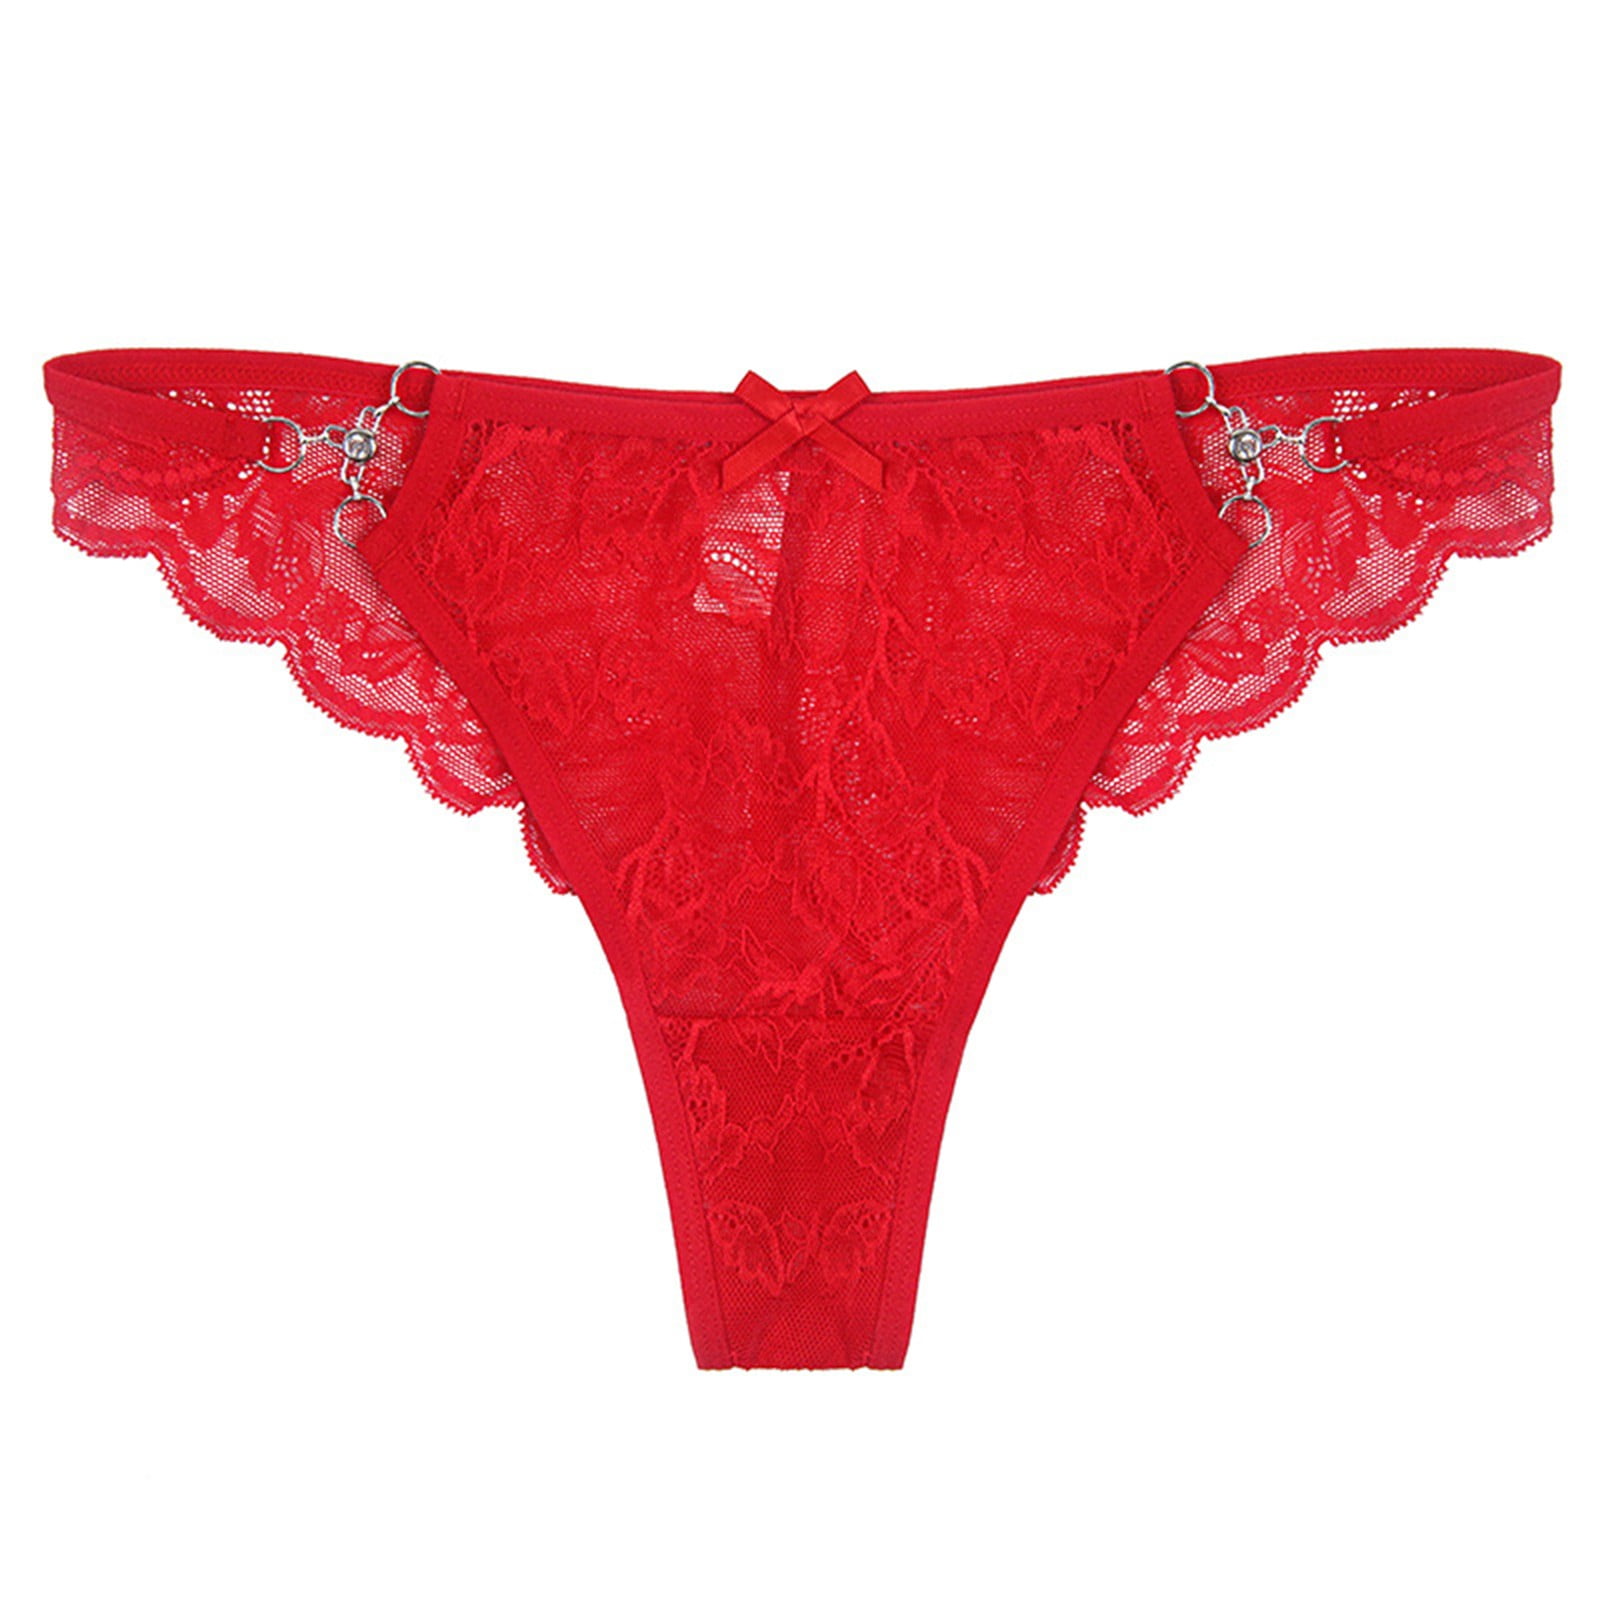 Pimfylm Thongs For Women Womens No Show Seamless Underwear Red